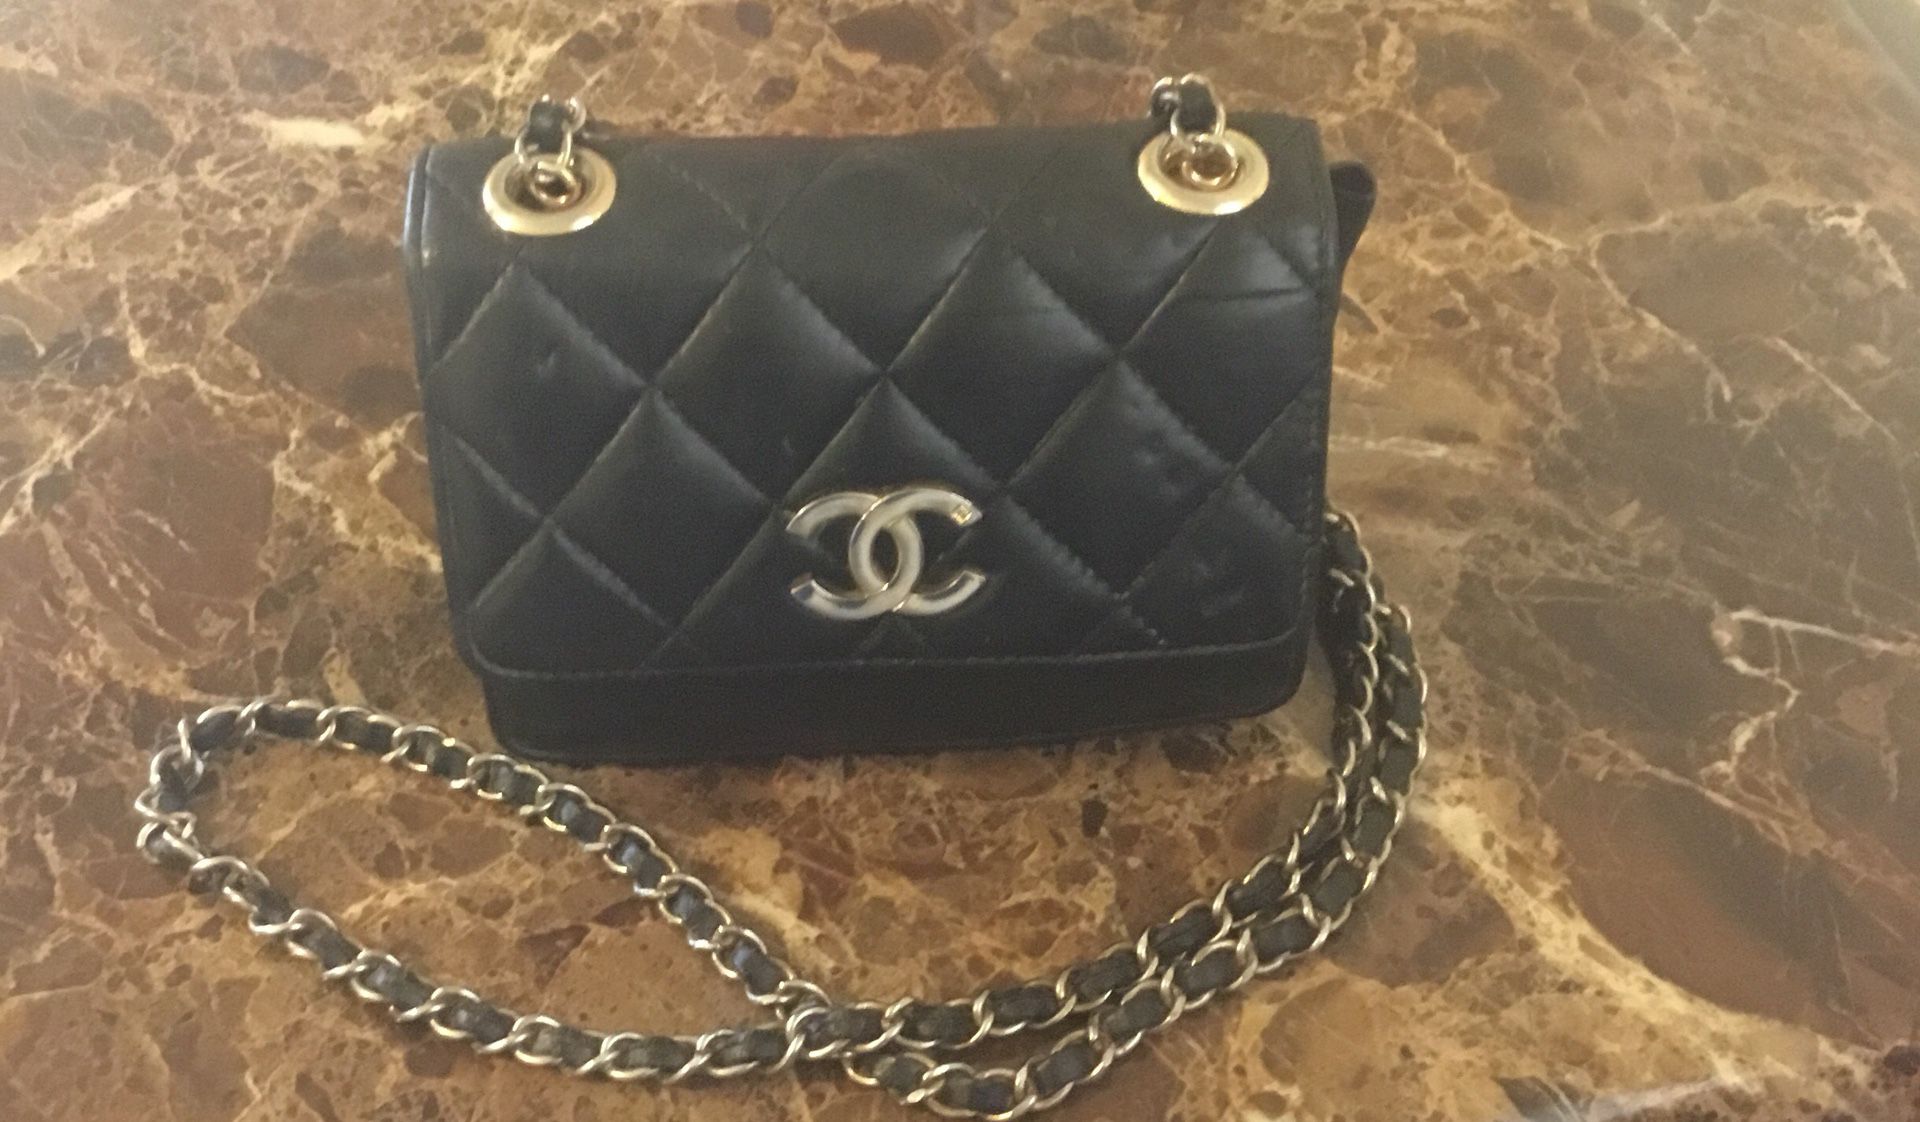 Vintage Chanel bag with Victory Hook PK 3940  Vintage chanel bag, Chanel  bag, Vintage chanel